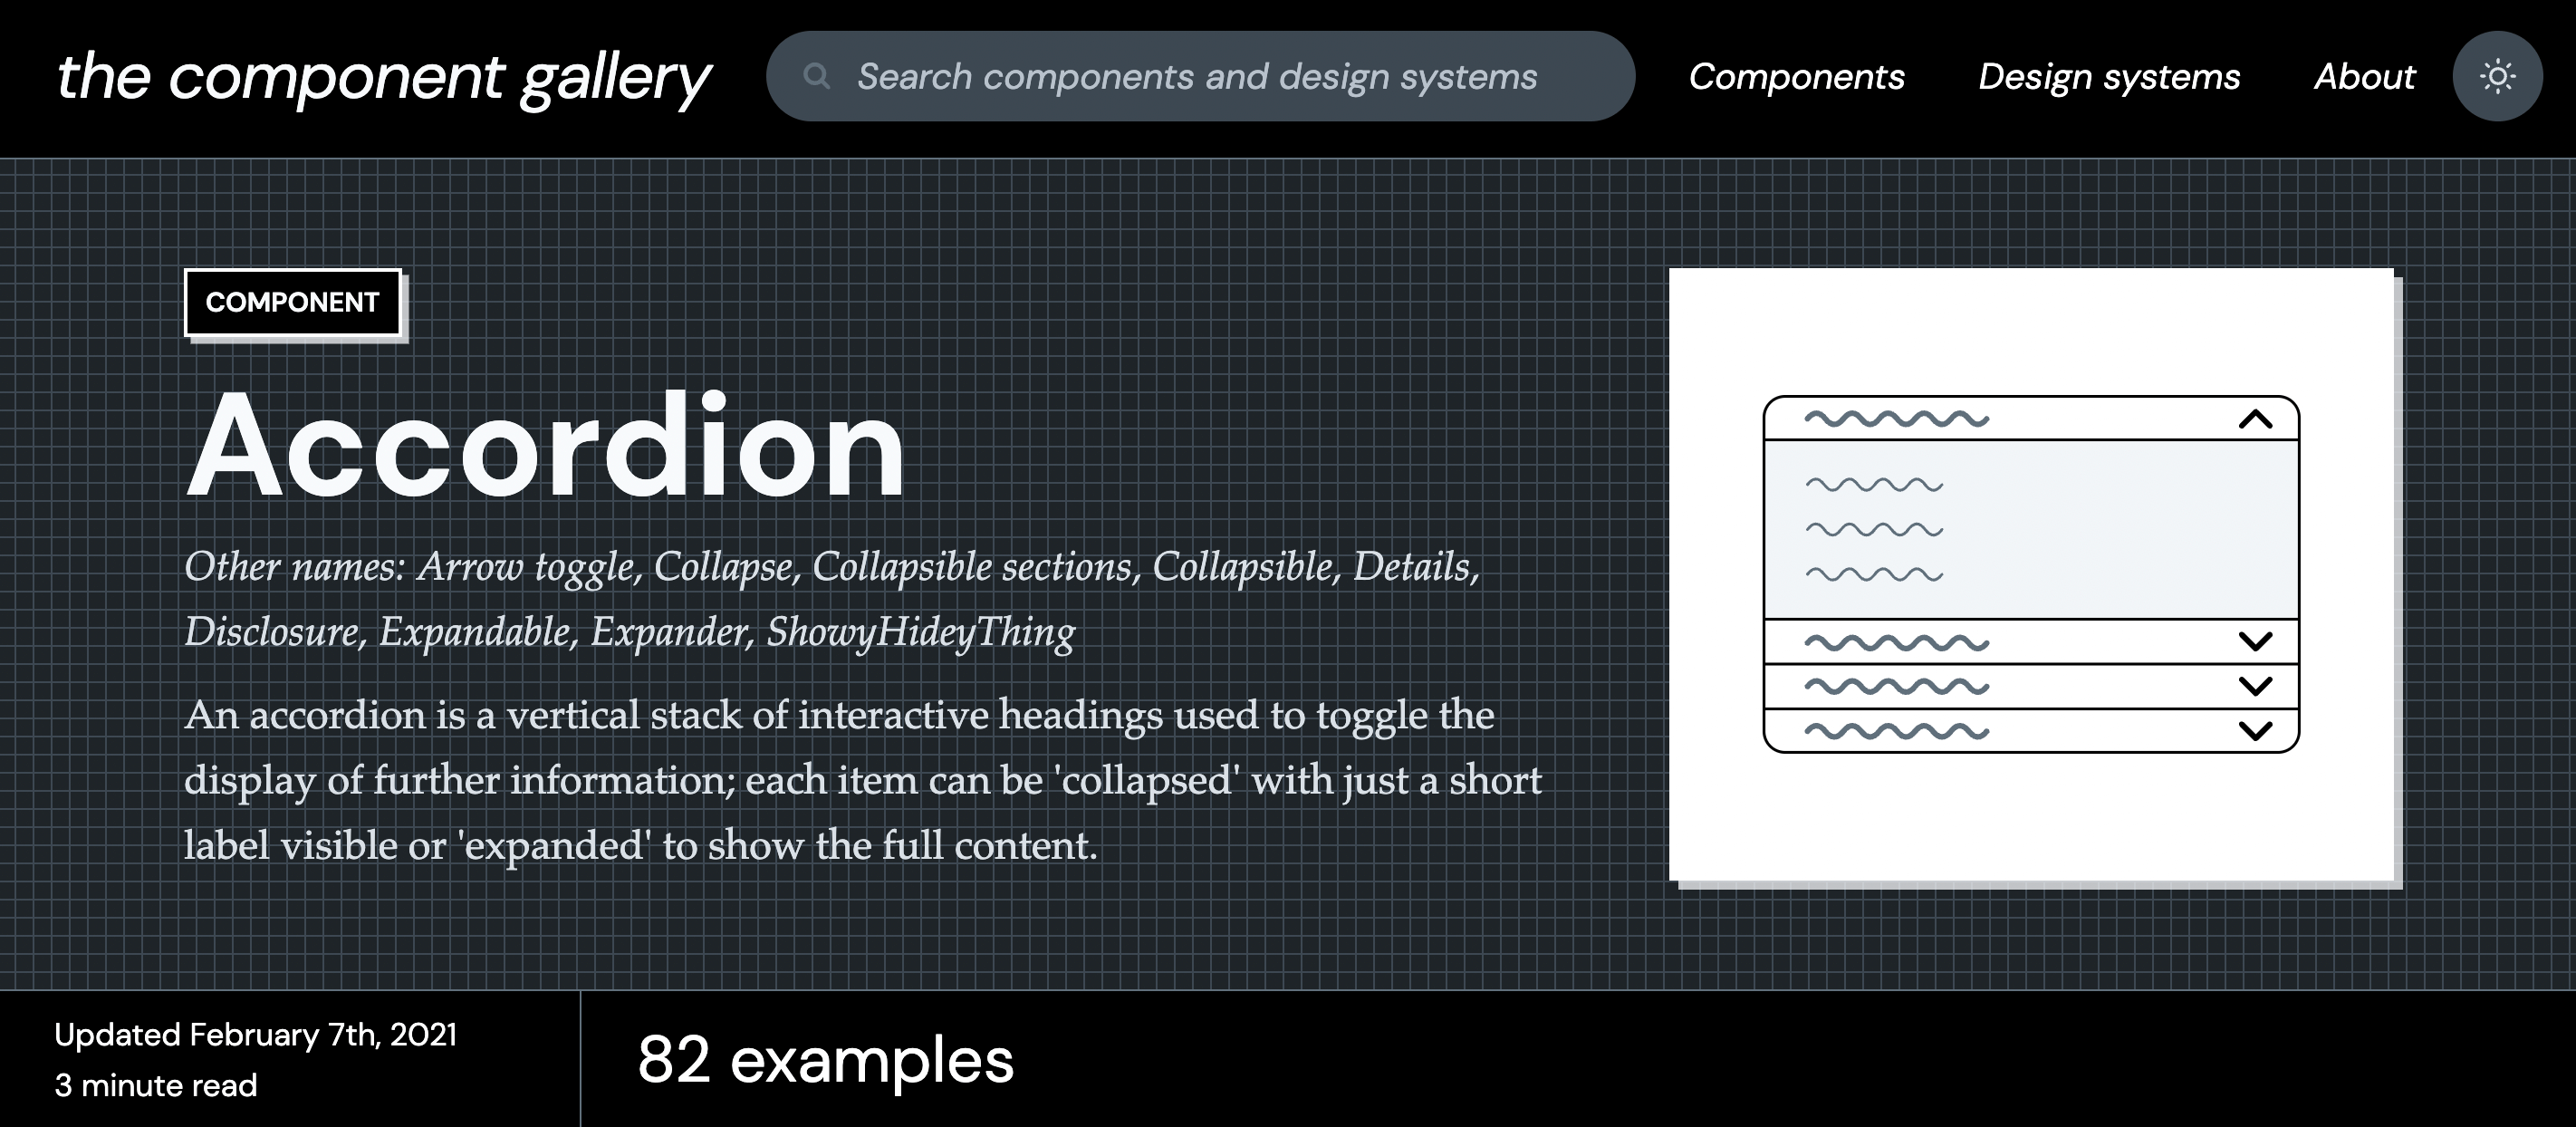 Screenshot from The Component Gallery of the ‘Accordion’ component.